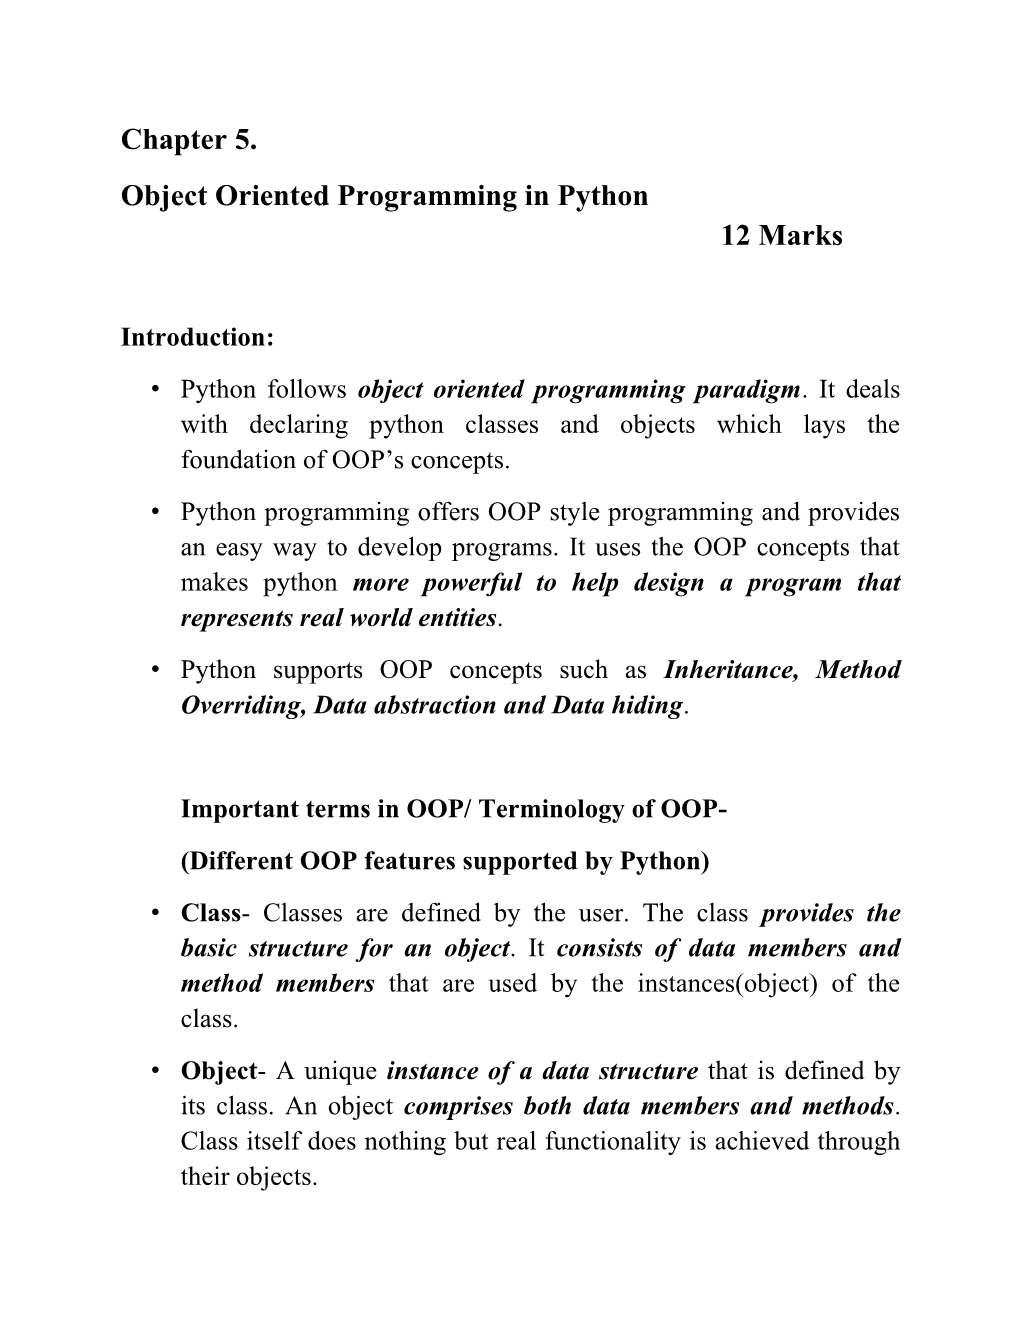 Chapter 5. Object Oriented Programming in Python 12 Marks